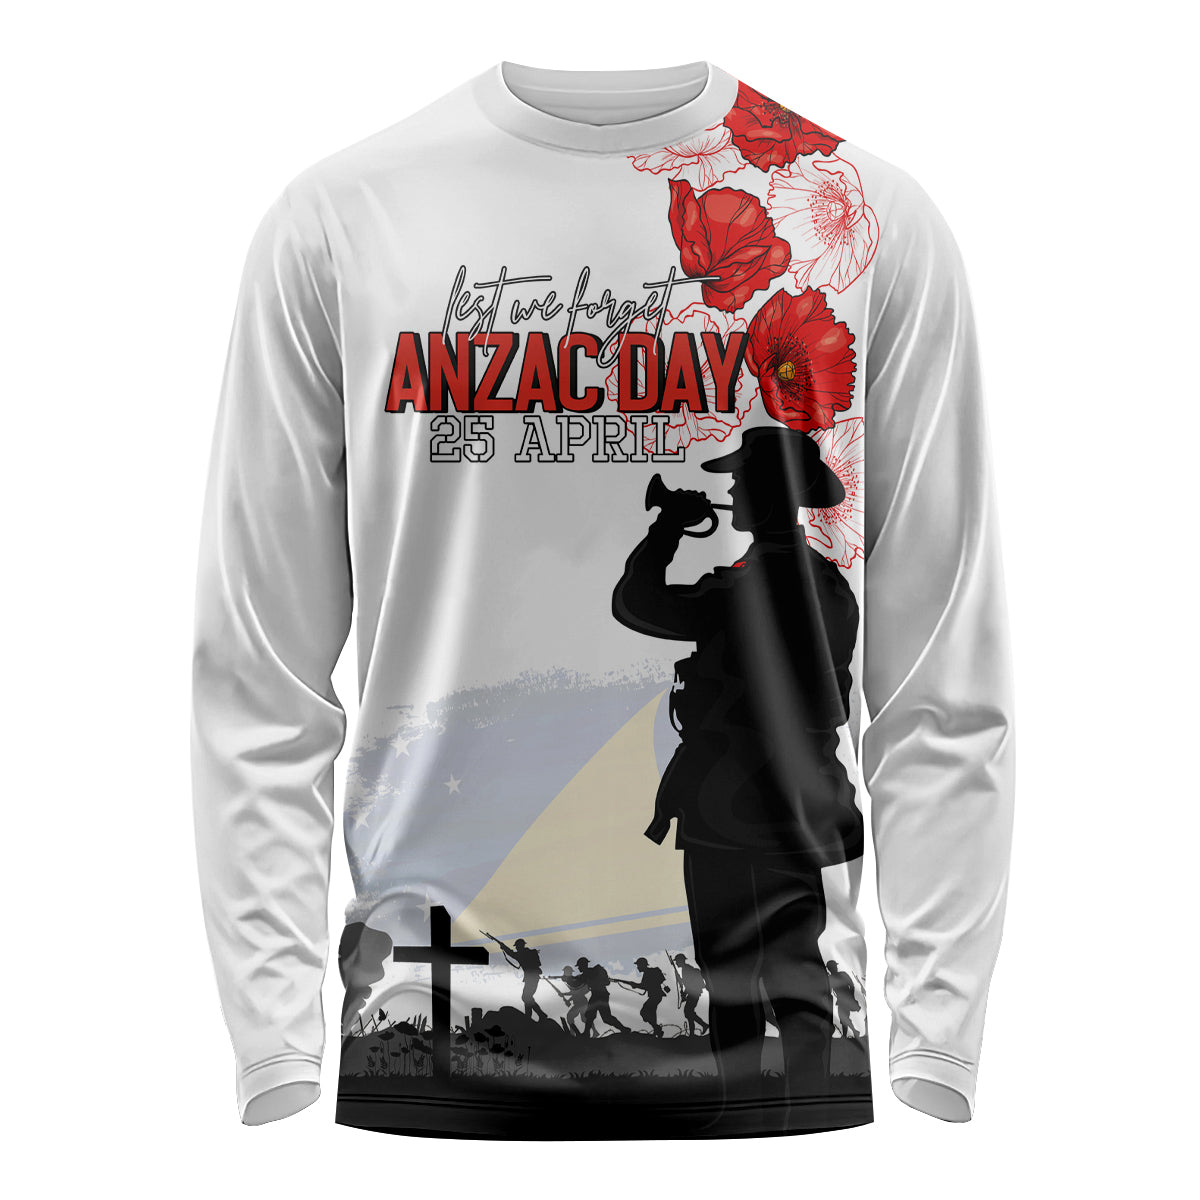 Tokelau ANZAC Day Long Sleeve Shirt Lest We Forget Red Poppy Flowers and Soldier LT03 Unisex White - Polynesian Pride